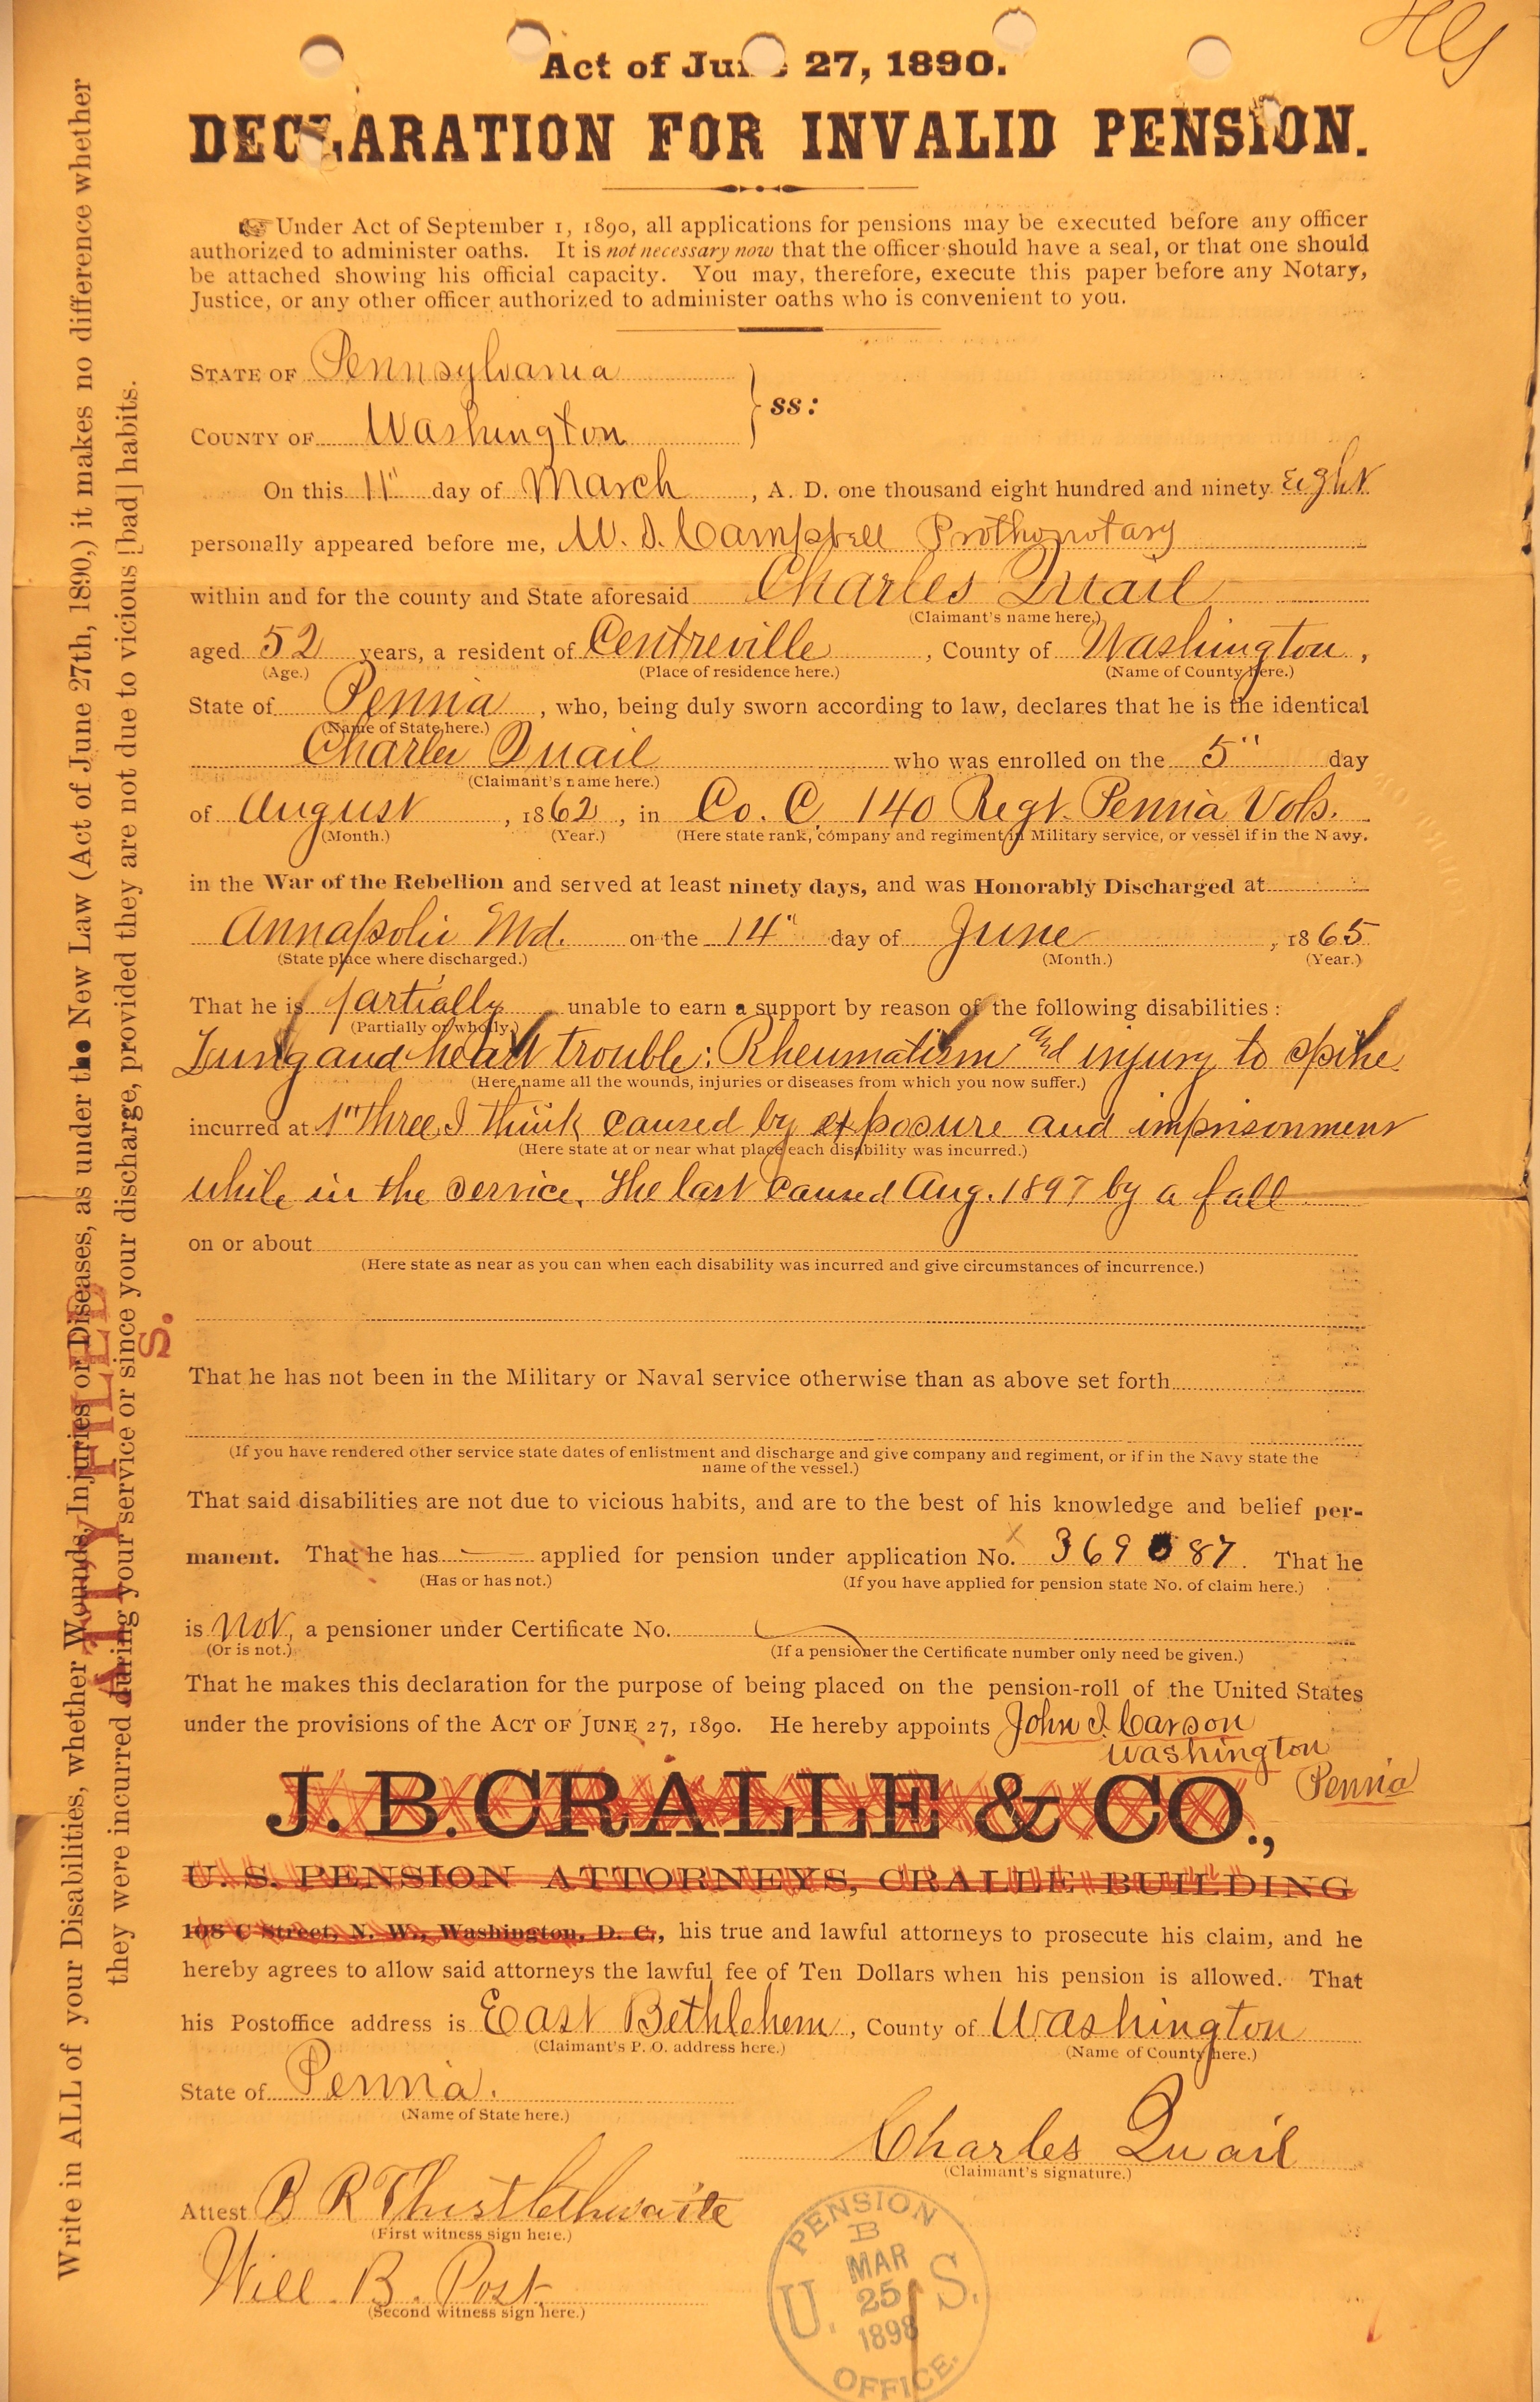 An application for a pension under the act of June 27, 1890